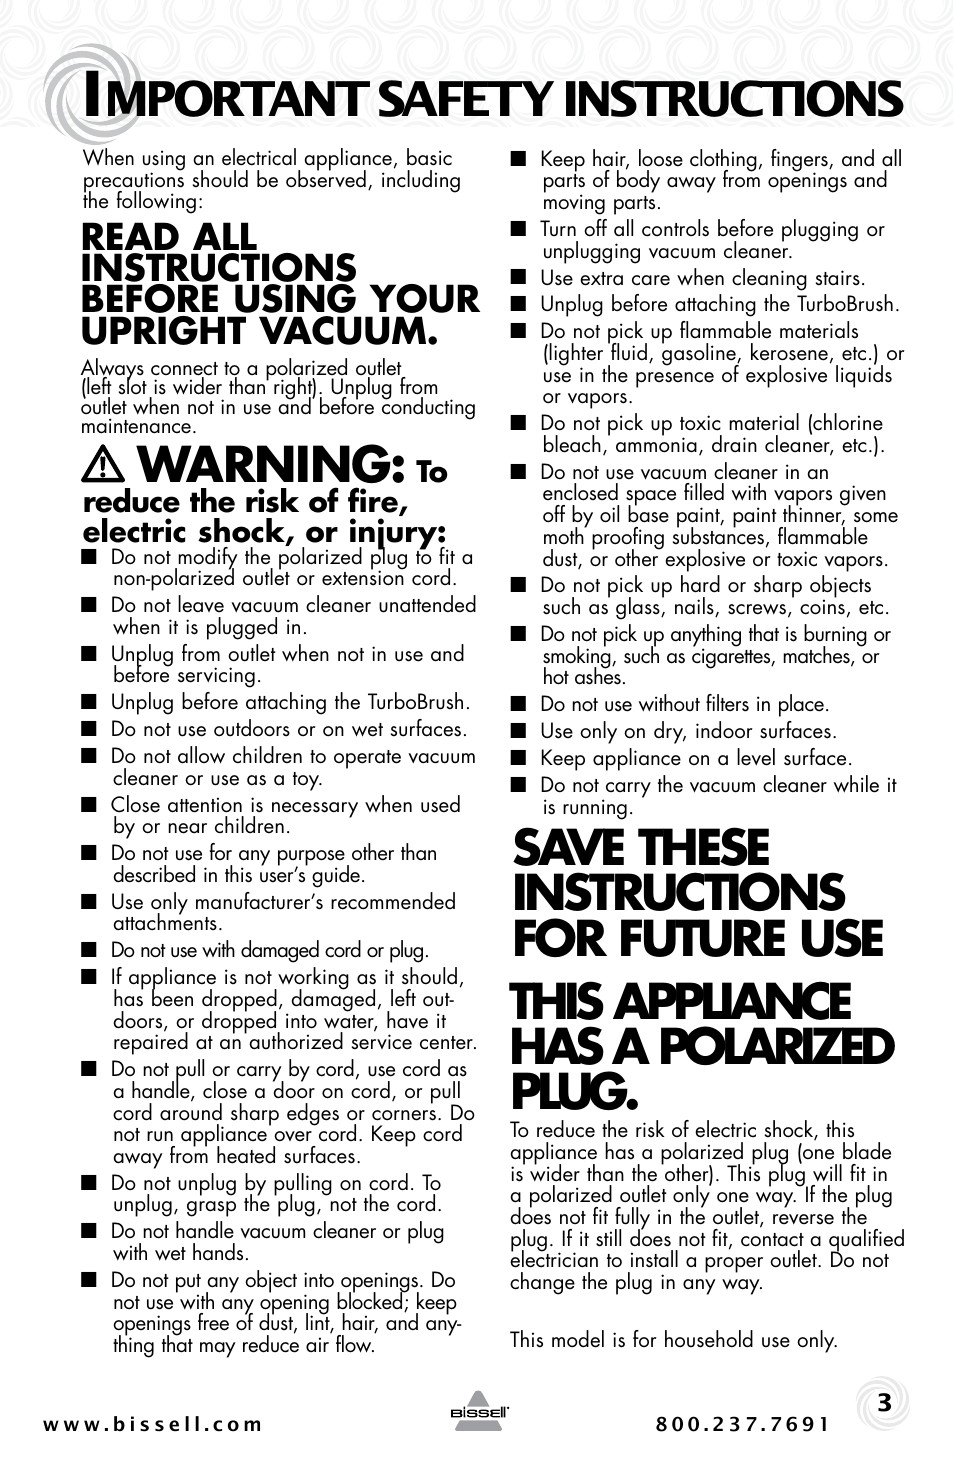 Mportant safety instructions, Warning | Bissell PET HAIR ERASER 3920 User Manual | Page 3 / 20